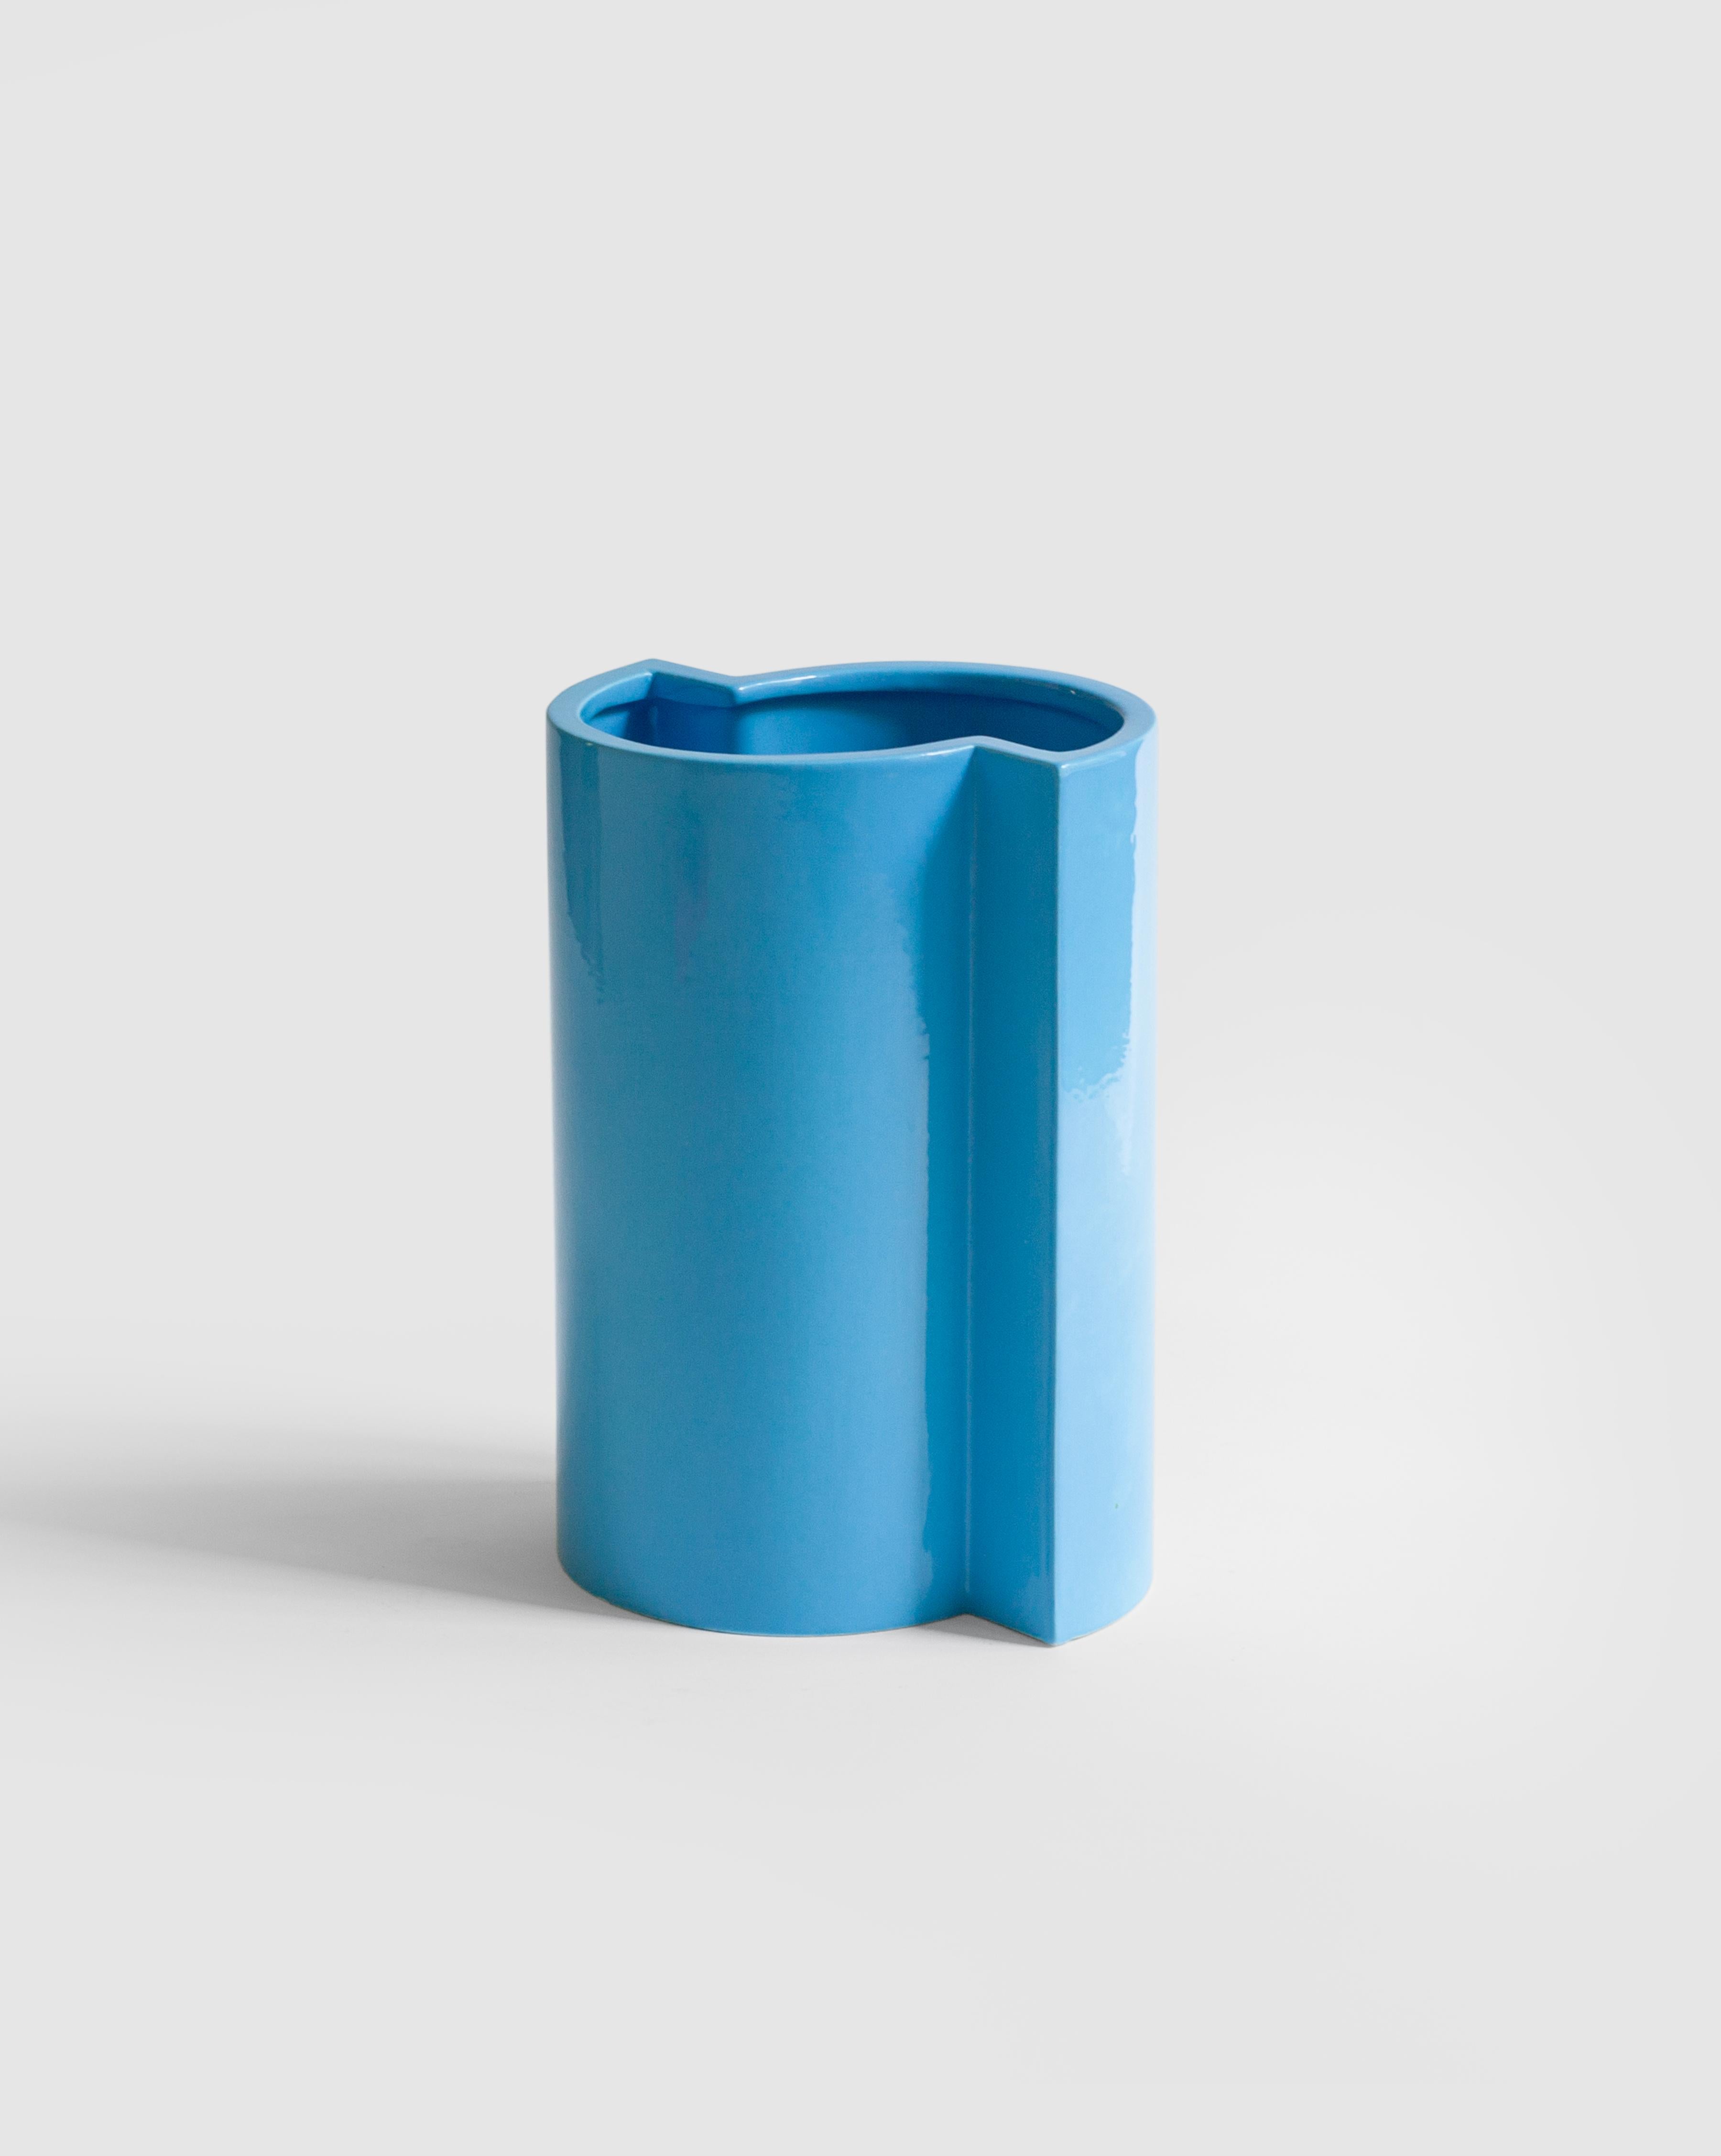 A minimalist and playful vase in slip-cast ceramic with a blue turquoise glaze, the piece is handmade in Milan.
Part of the 